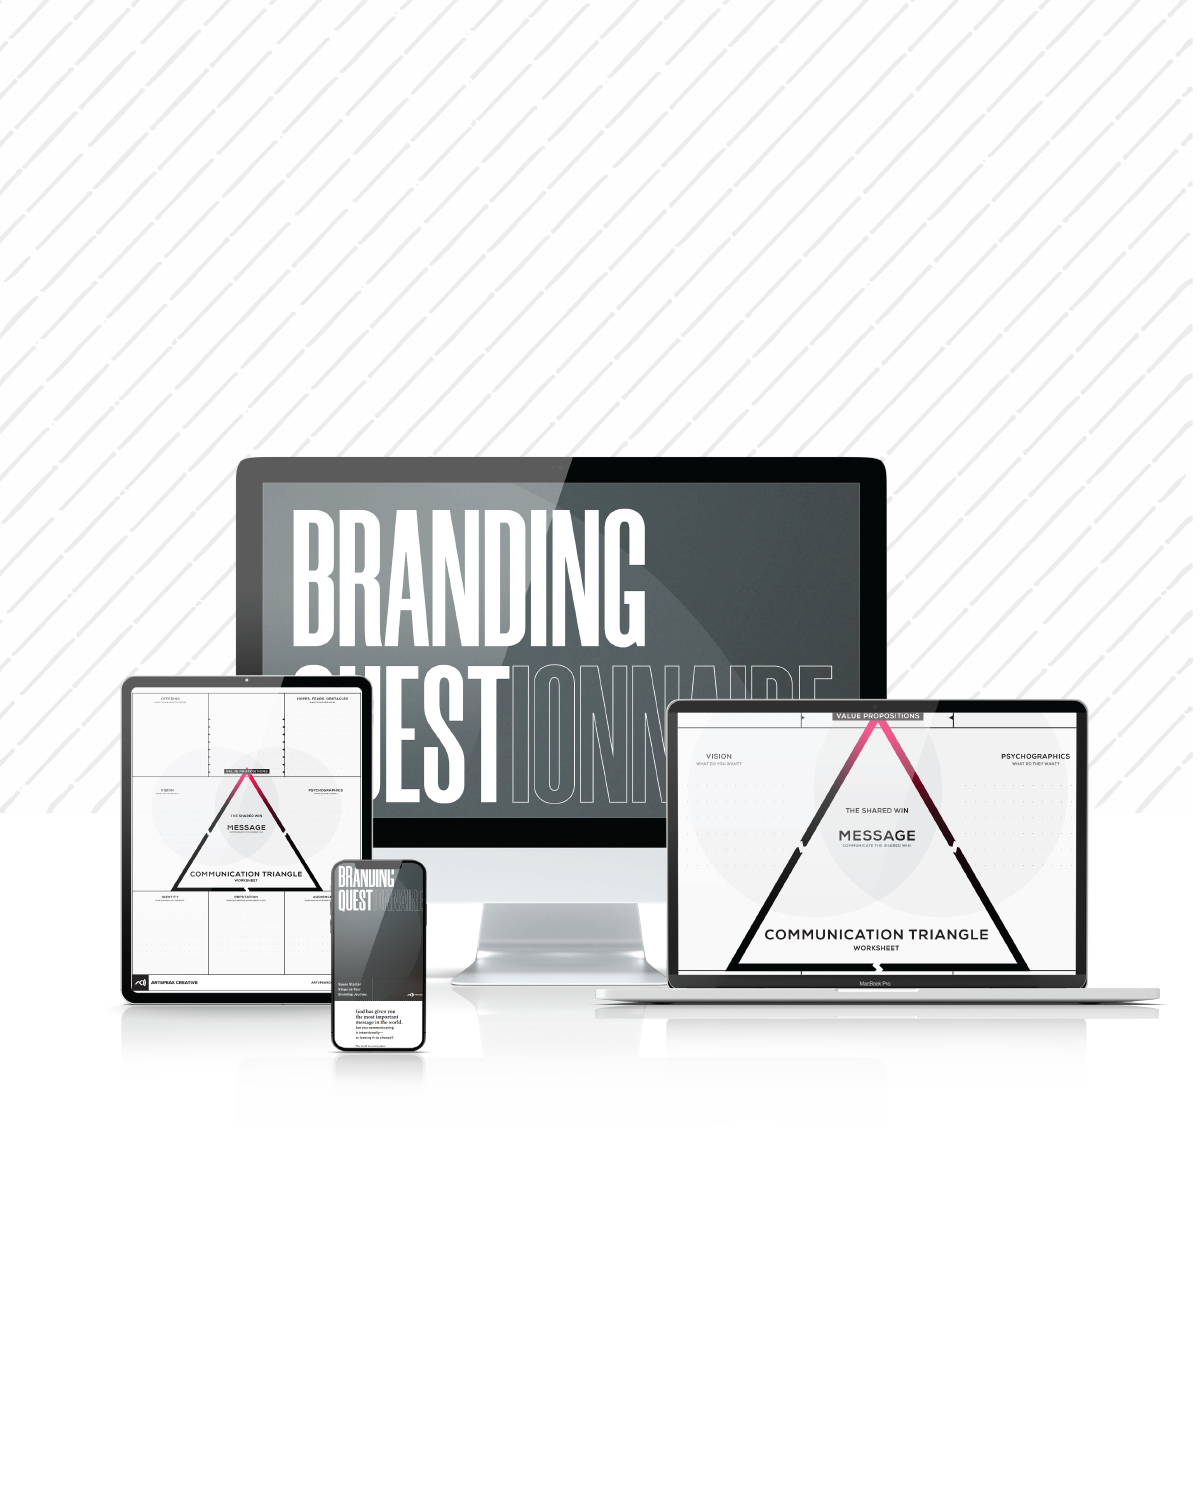 Download: Branding for Churches